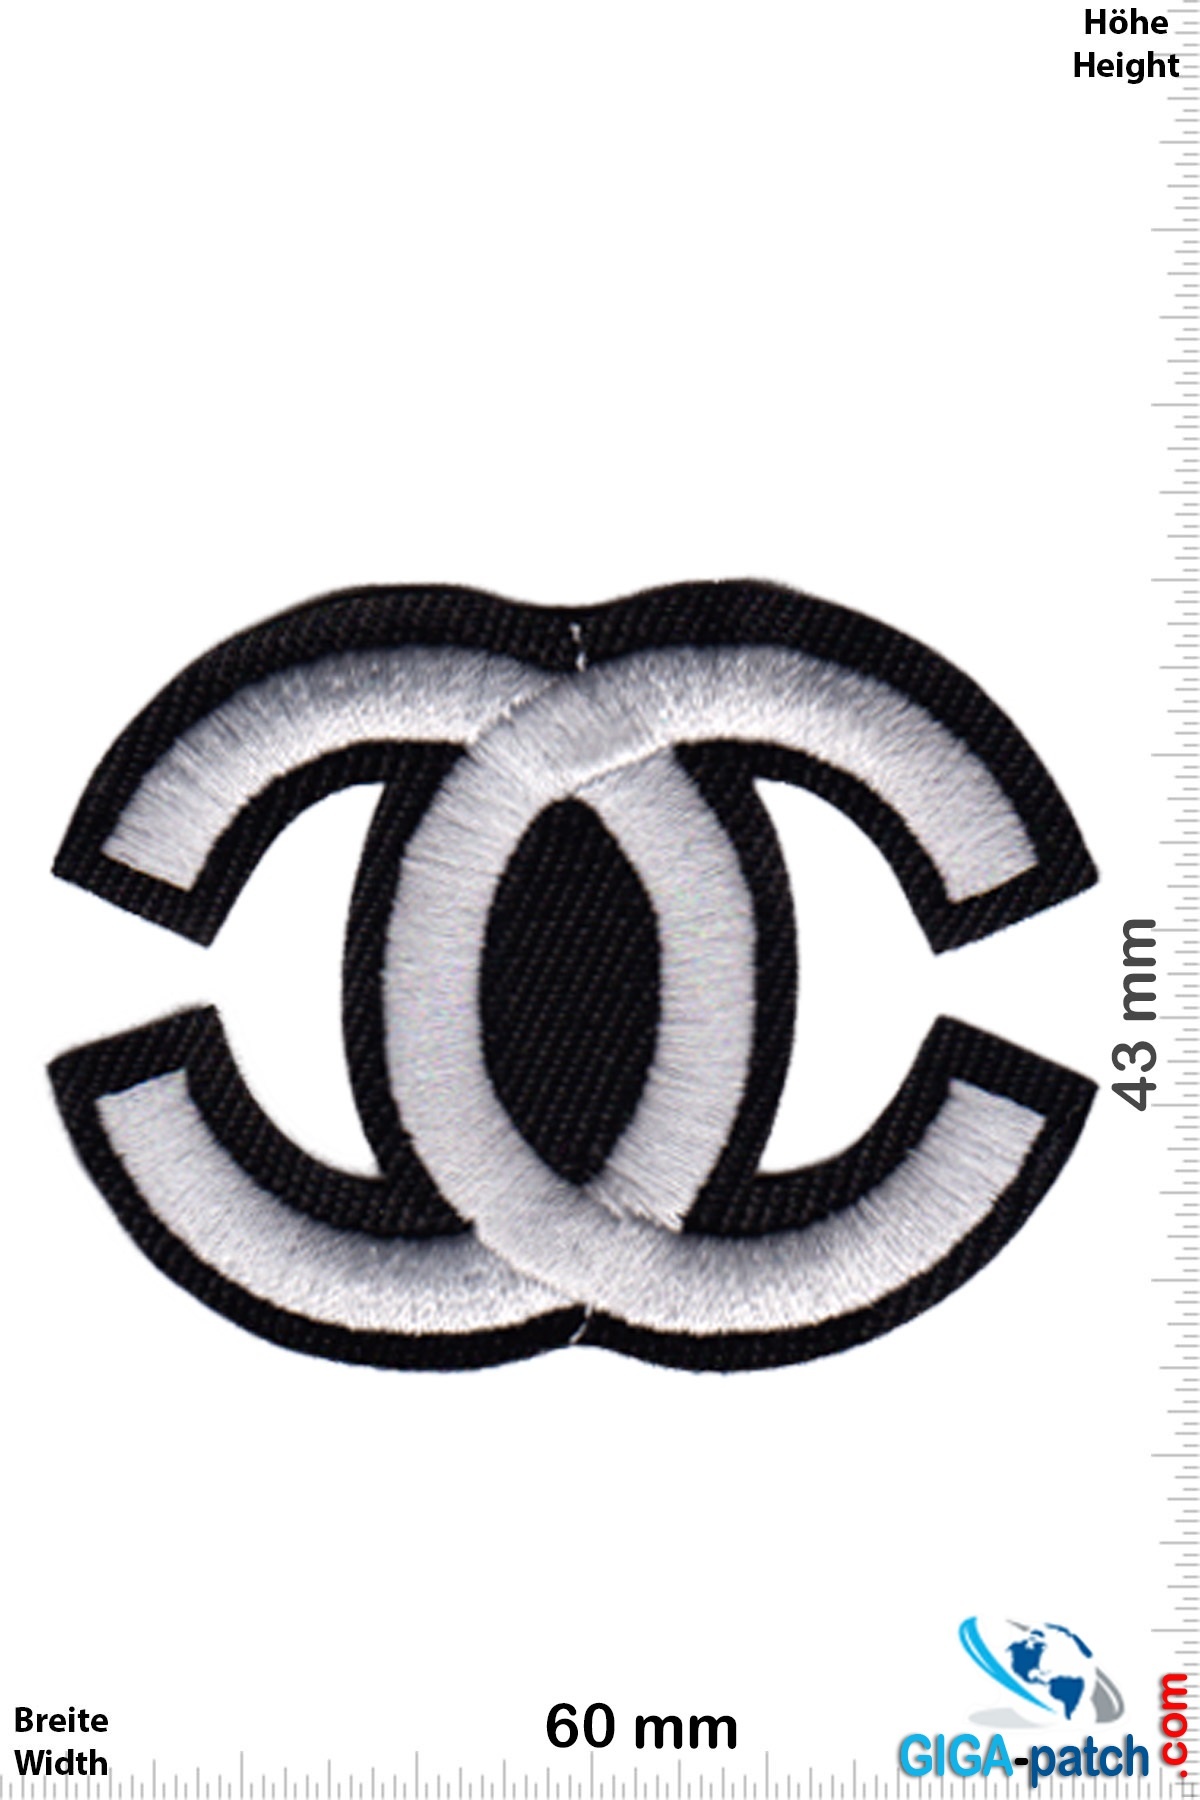 chanel - CC - Chanel - silver - Softpatch- Patch - Back Patches - Patch  Keychains Stickers -  - Biggest Patch Shop worldwide